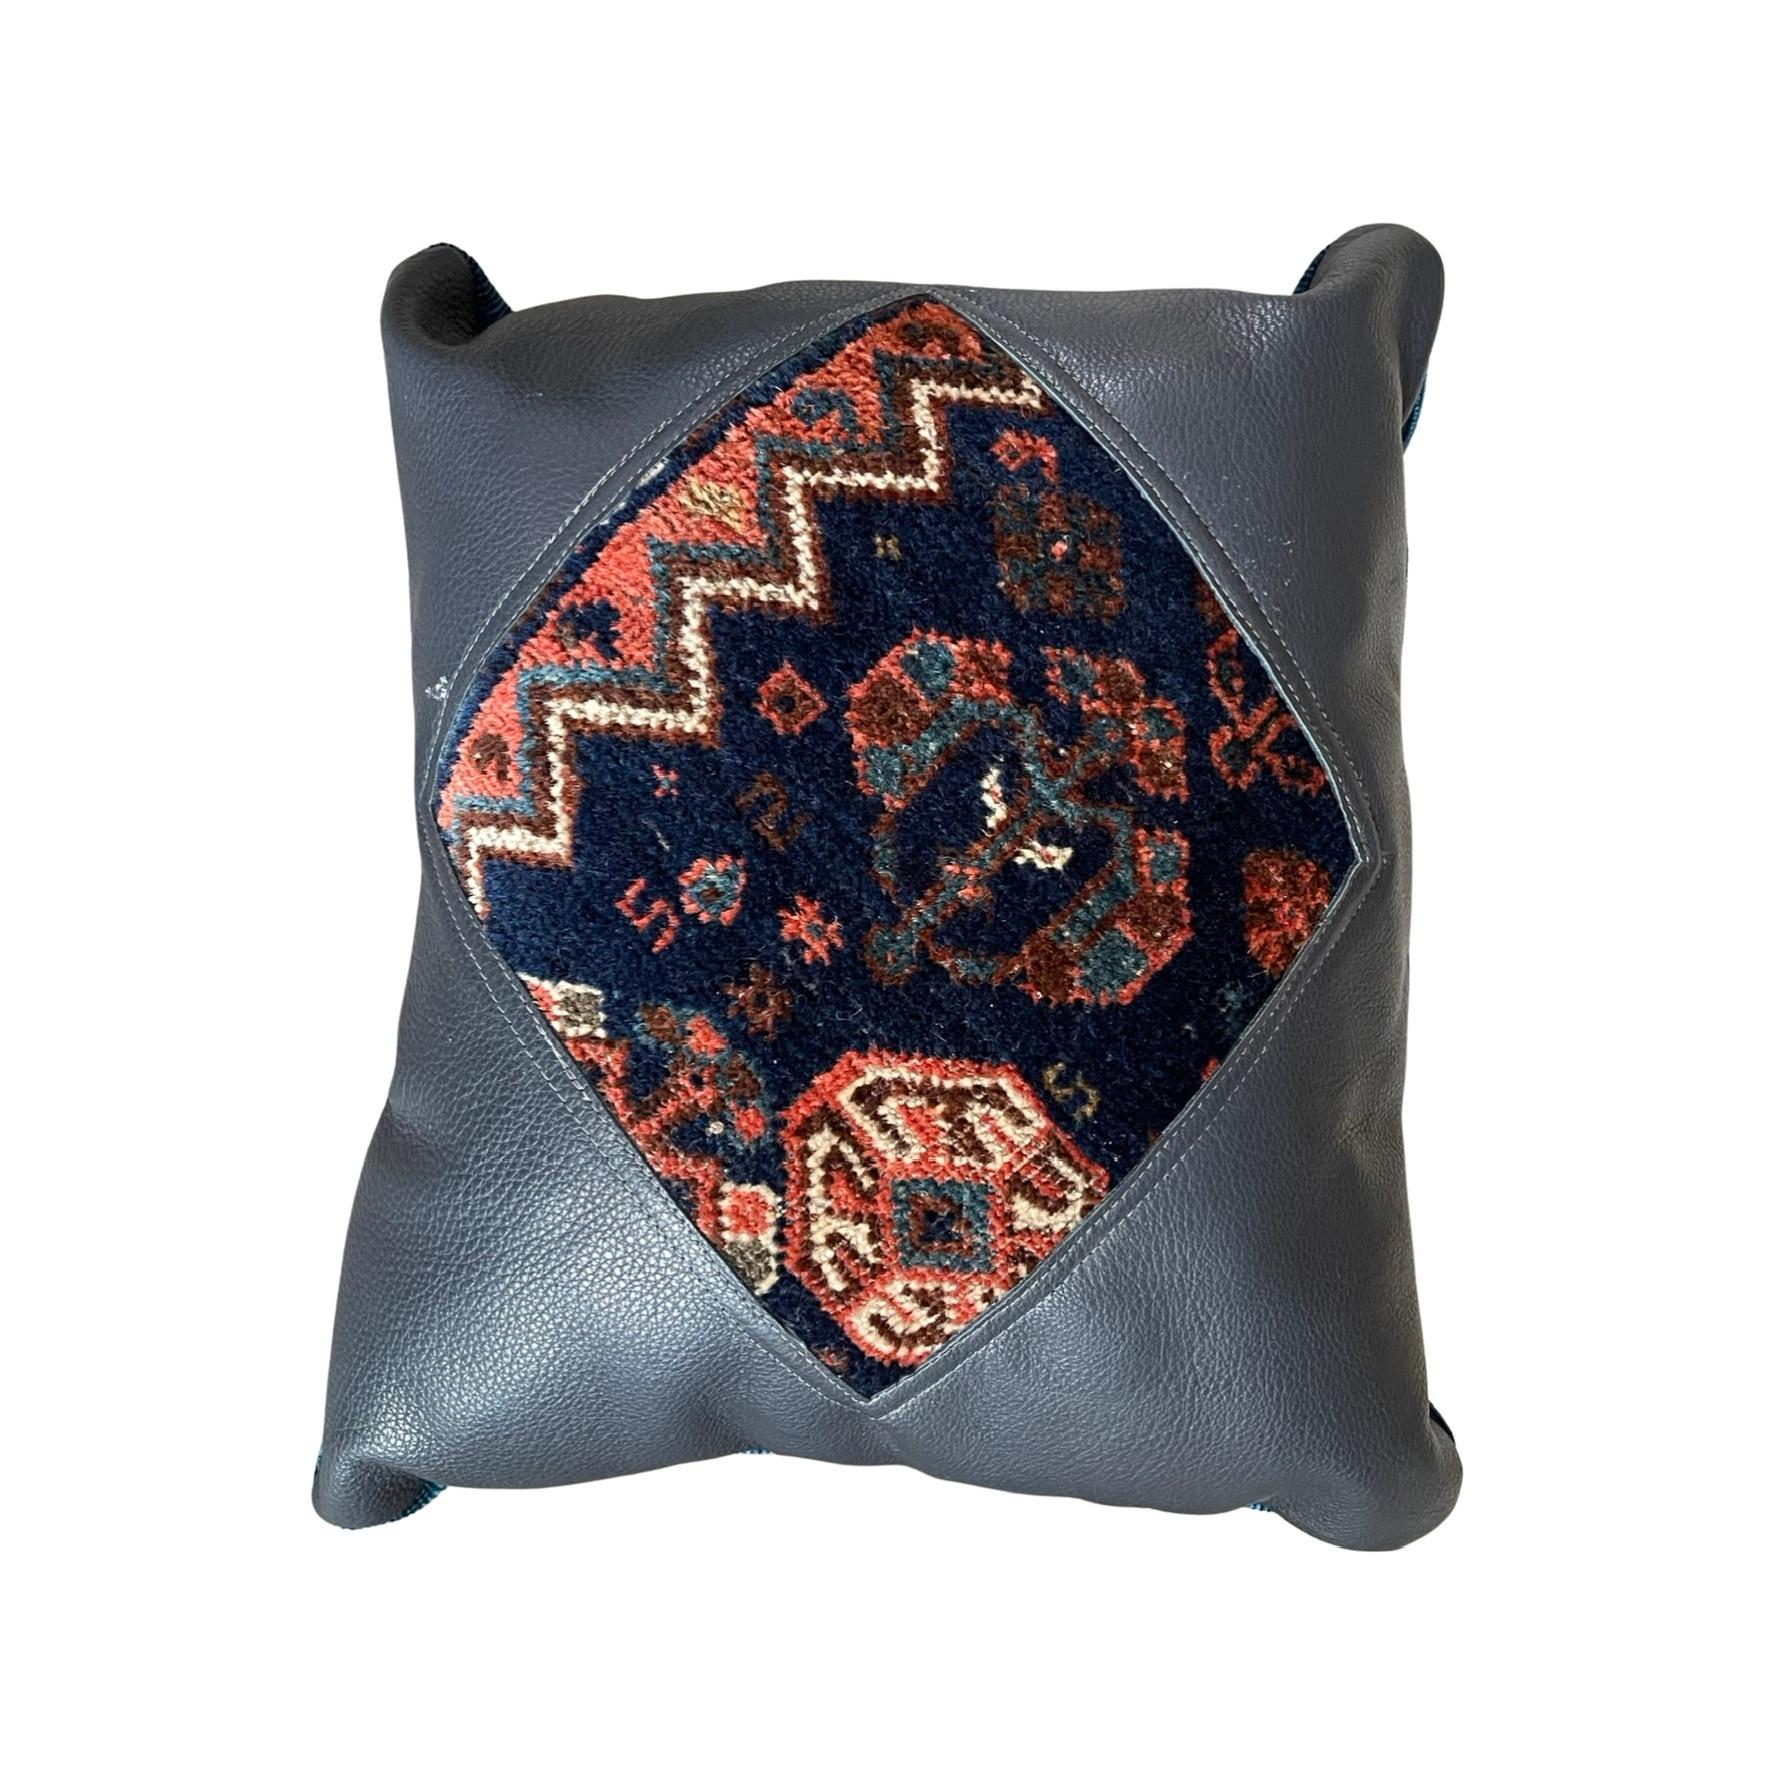 Vegetable Dyed Antique Persian Rug Pillow For Sale